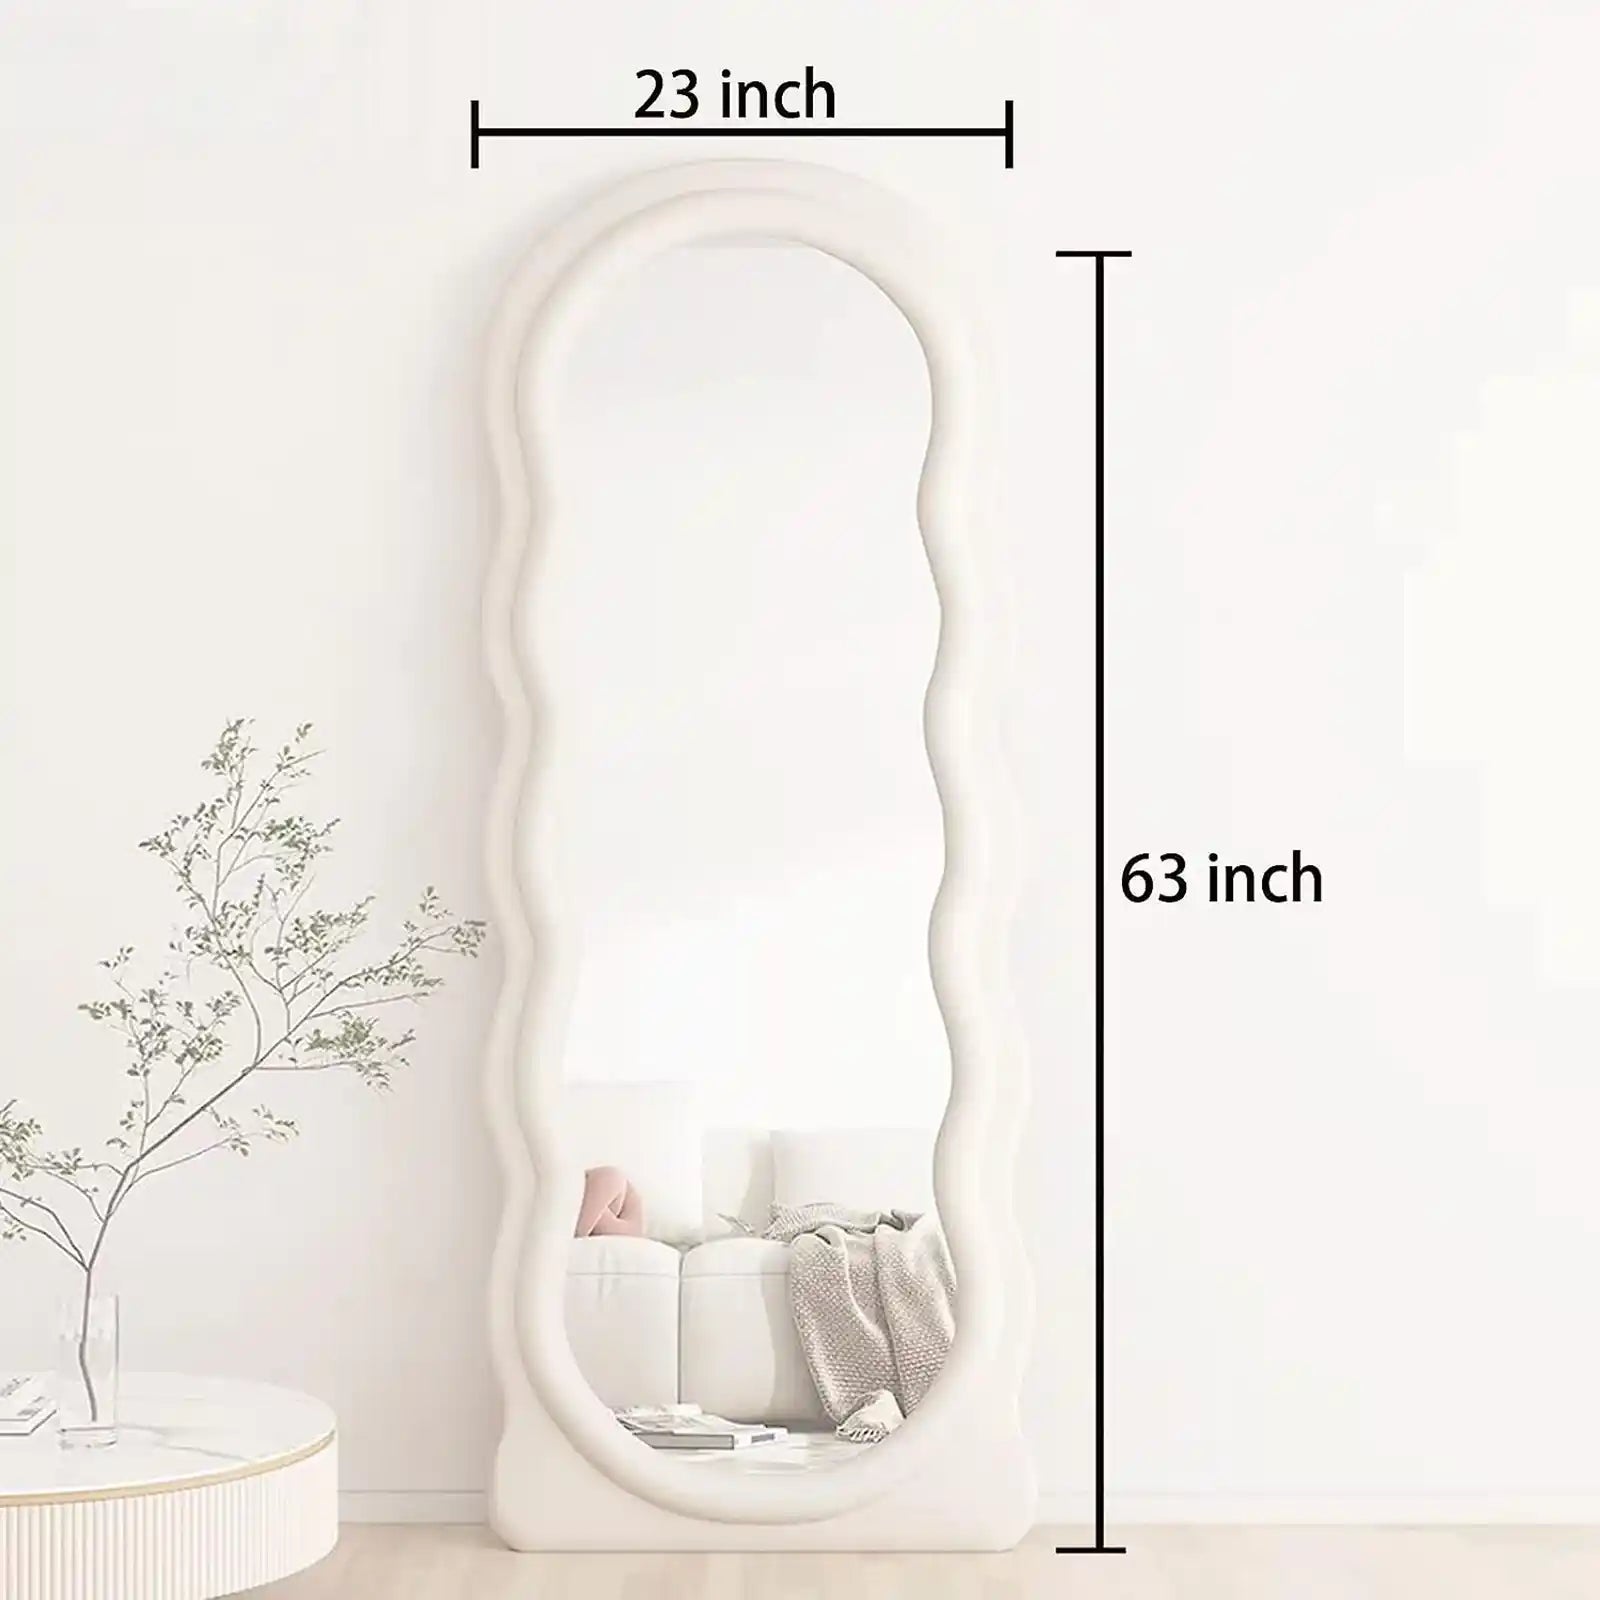 Full Length Mirror 63"x24", Irregular Wavy Mirror, Wave Floor Mirror, Wall Mounted Mirror Standing or Leaning Against Wall for Bedroom Living Room, Flannel Wrapped Wooden Frame Mirror-Black